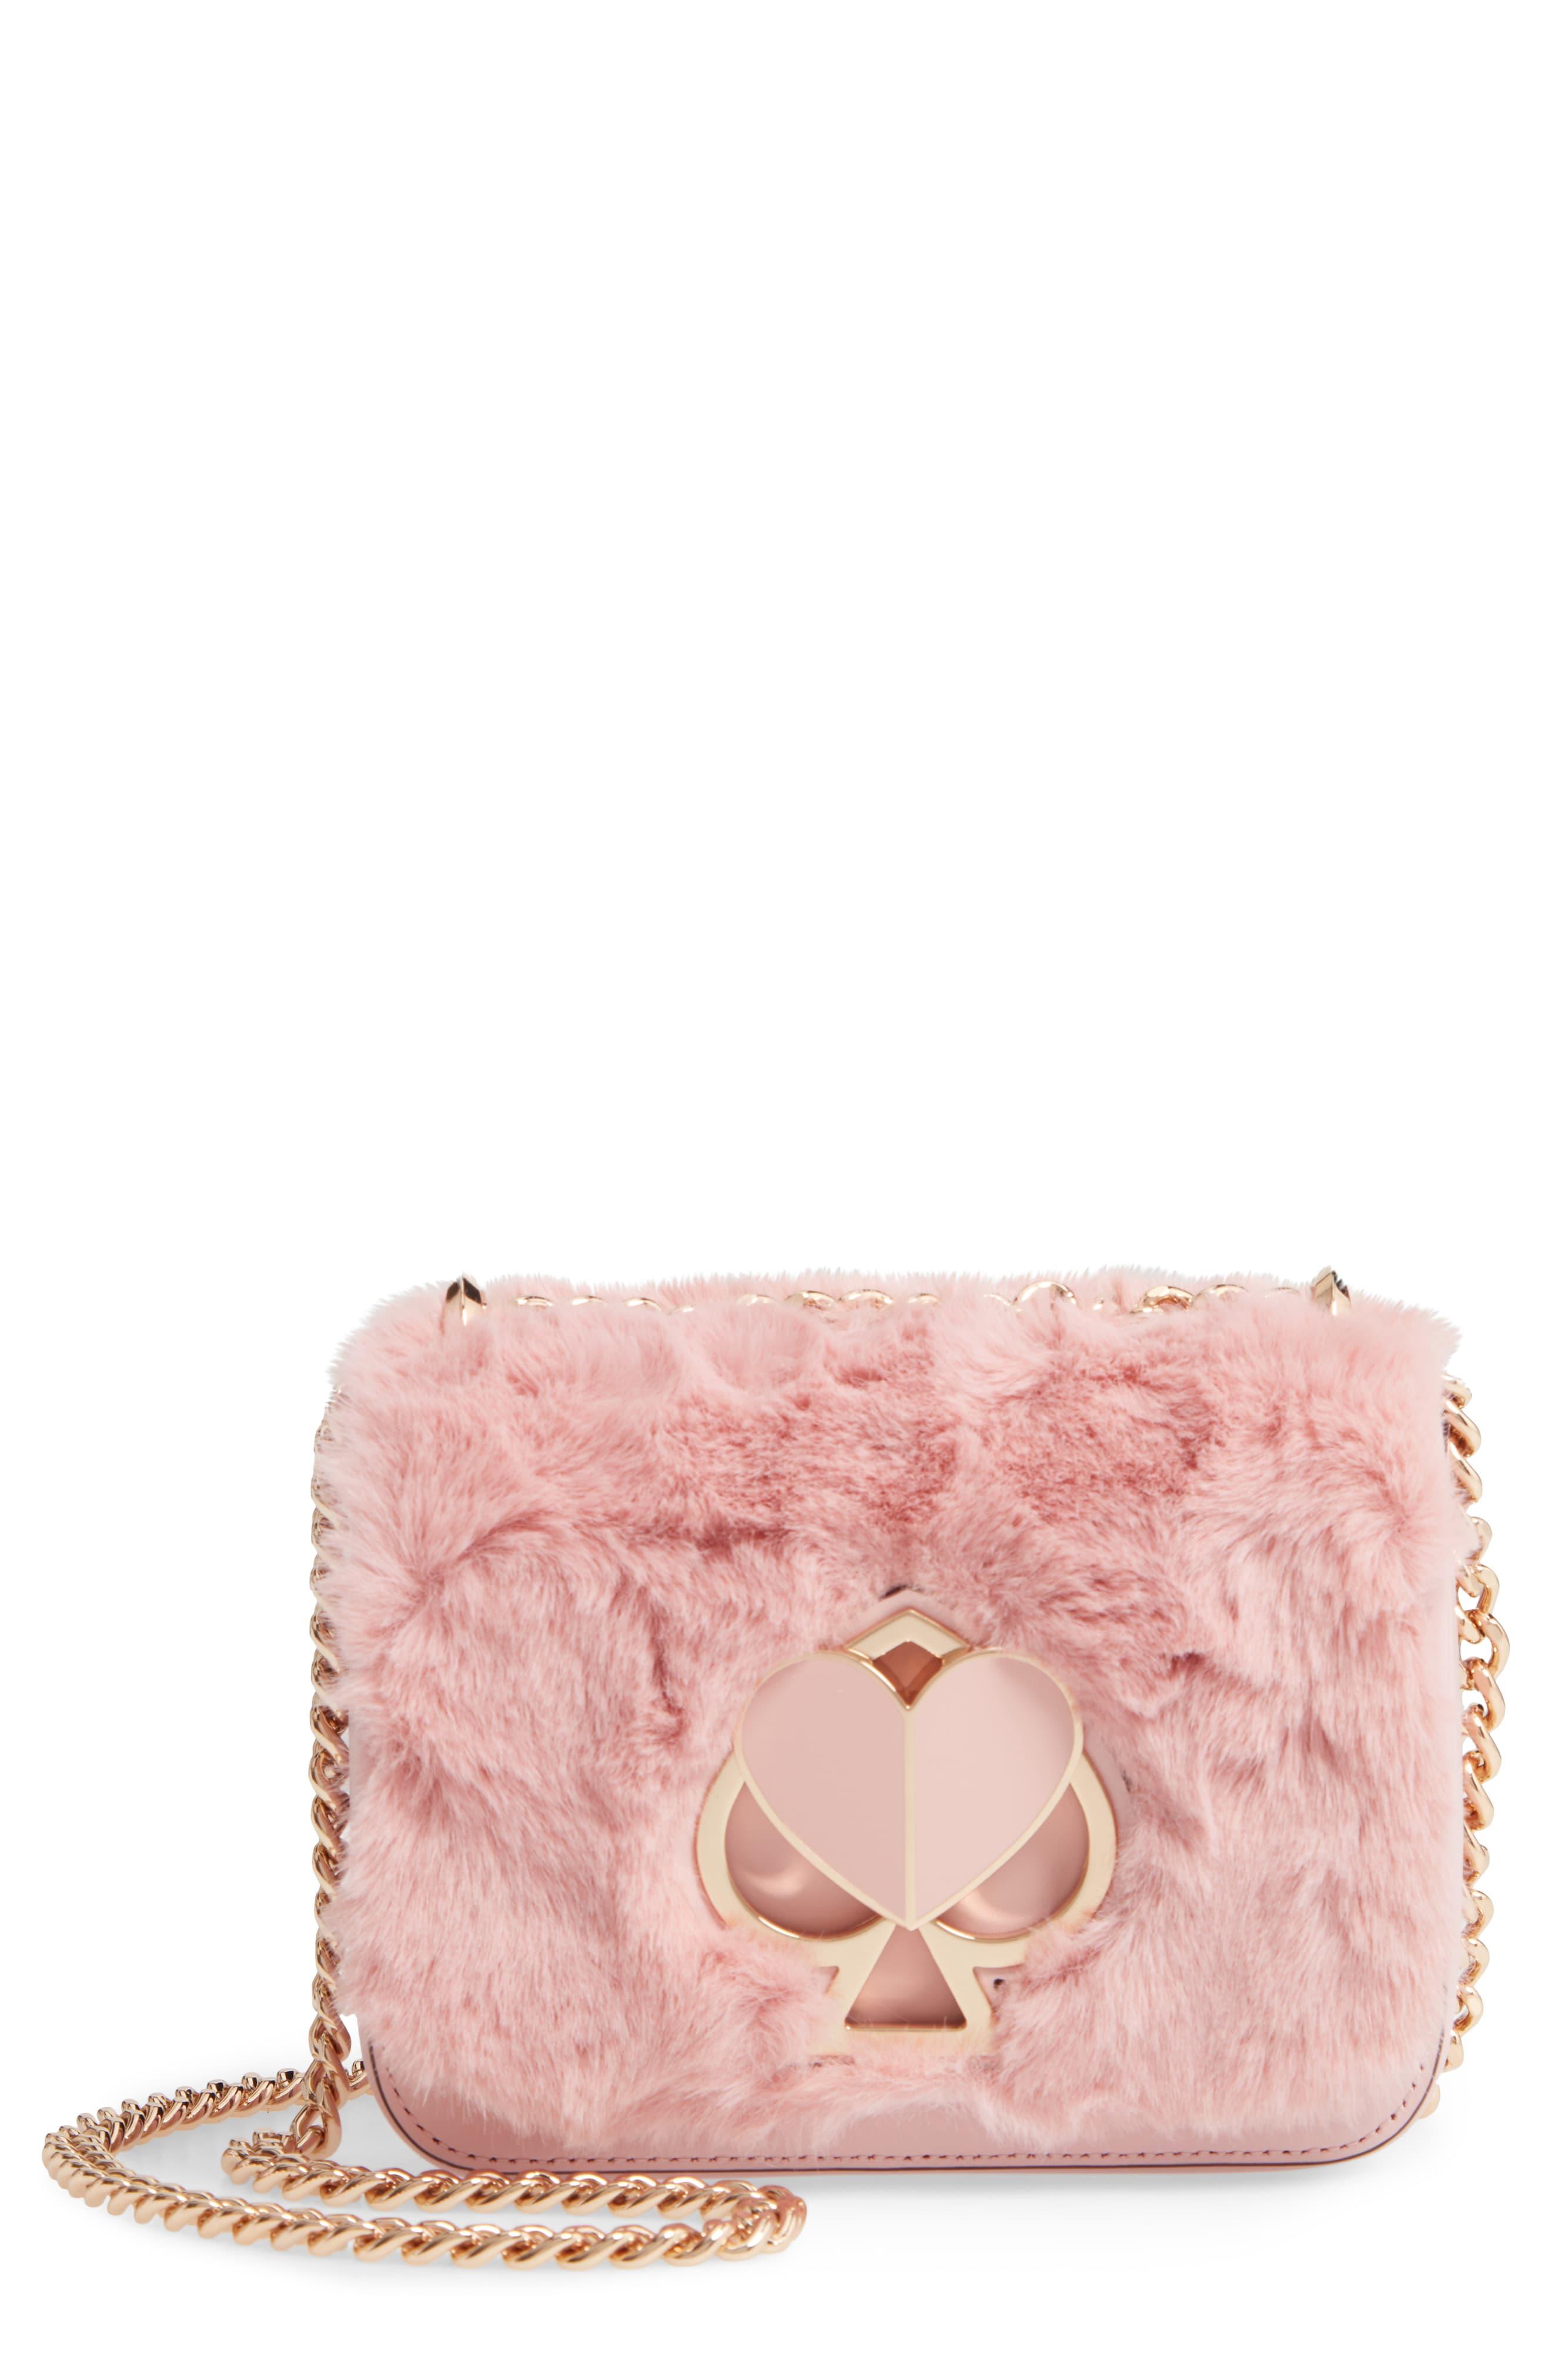 Kate Spade Small Nicola Faux Fur & Leather Shoulder Bag in Pink